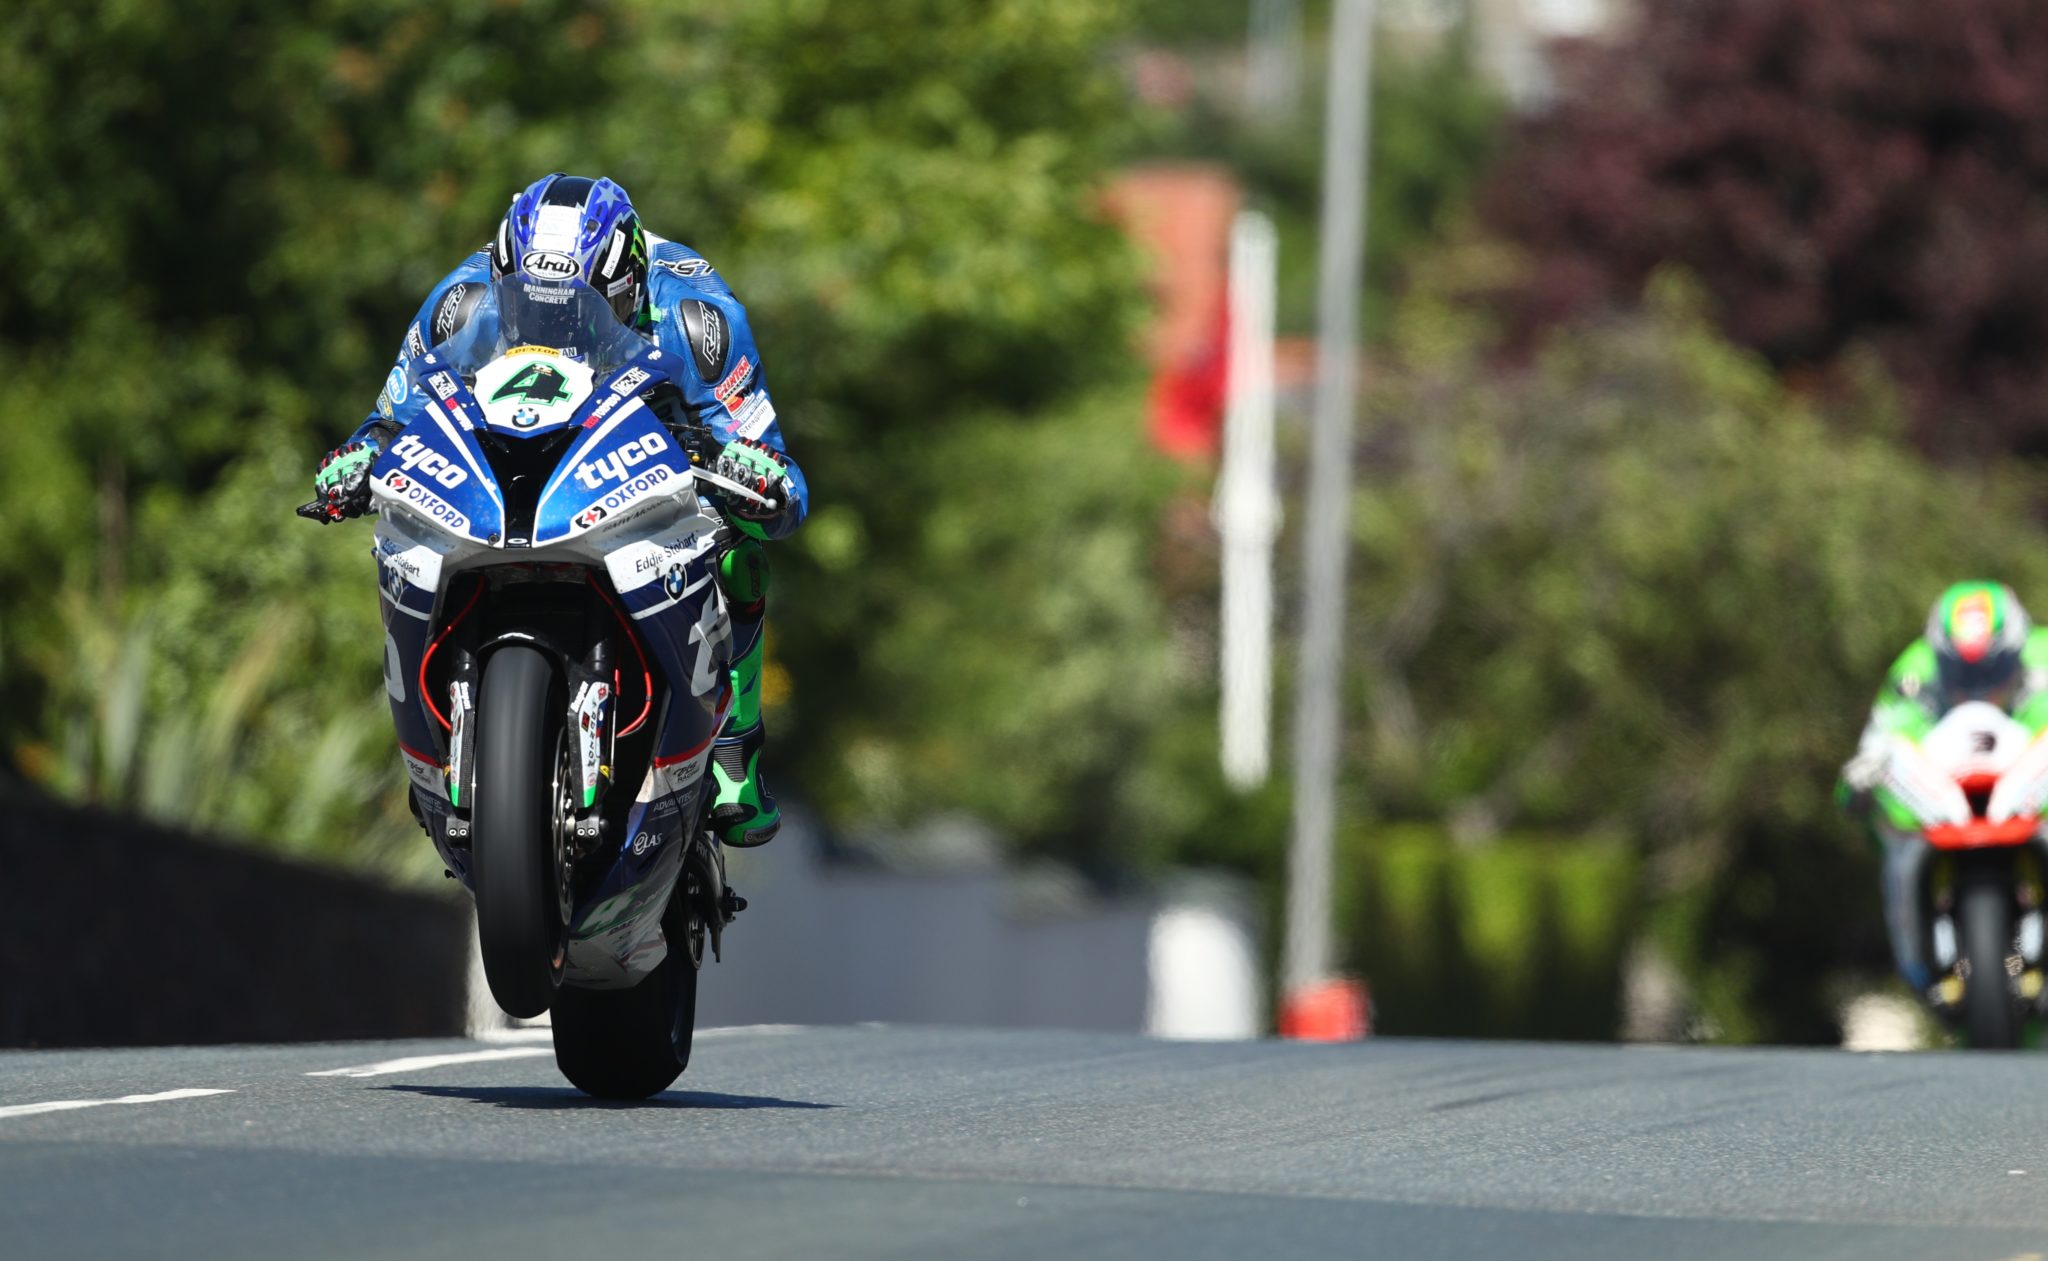 Ian Hutchinson TT 2017 image by Double Red